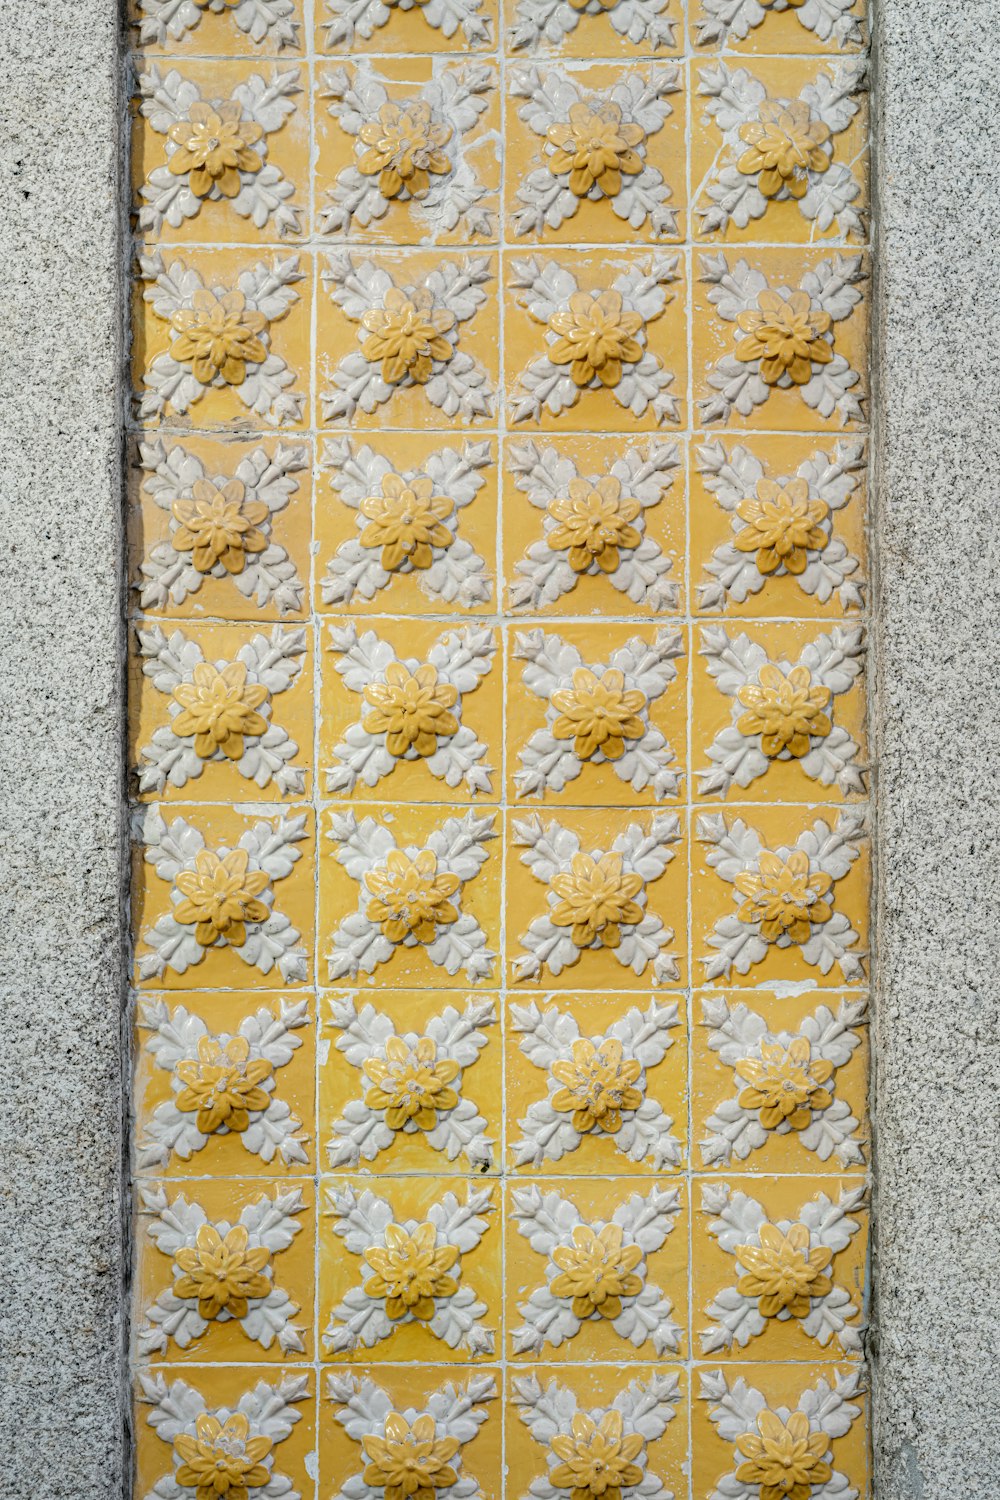 a yellow and white tile with white flowers on it